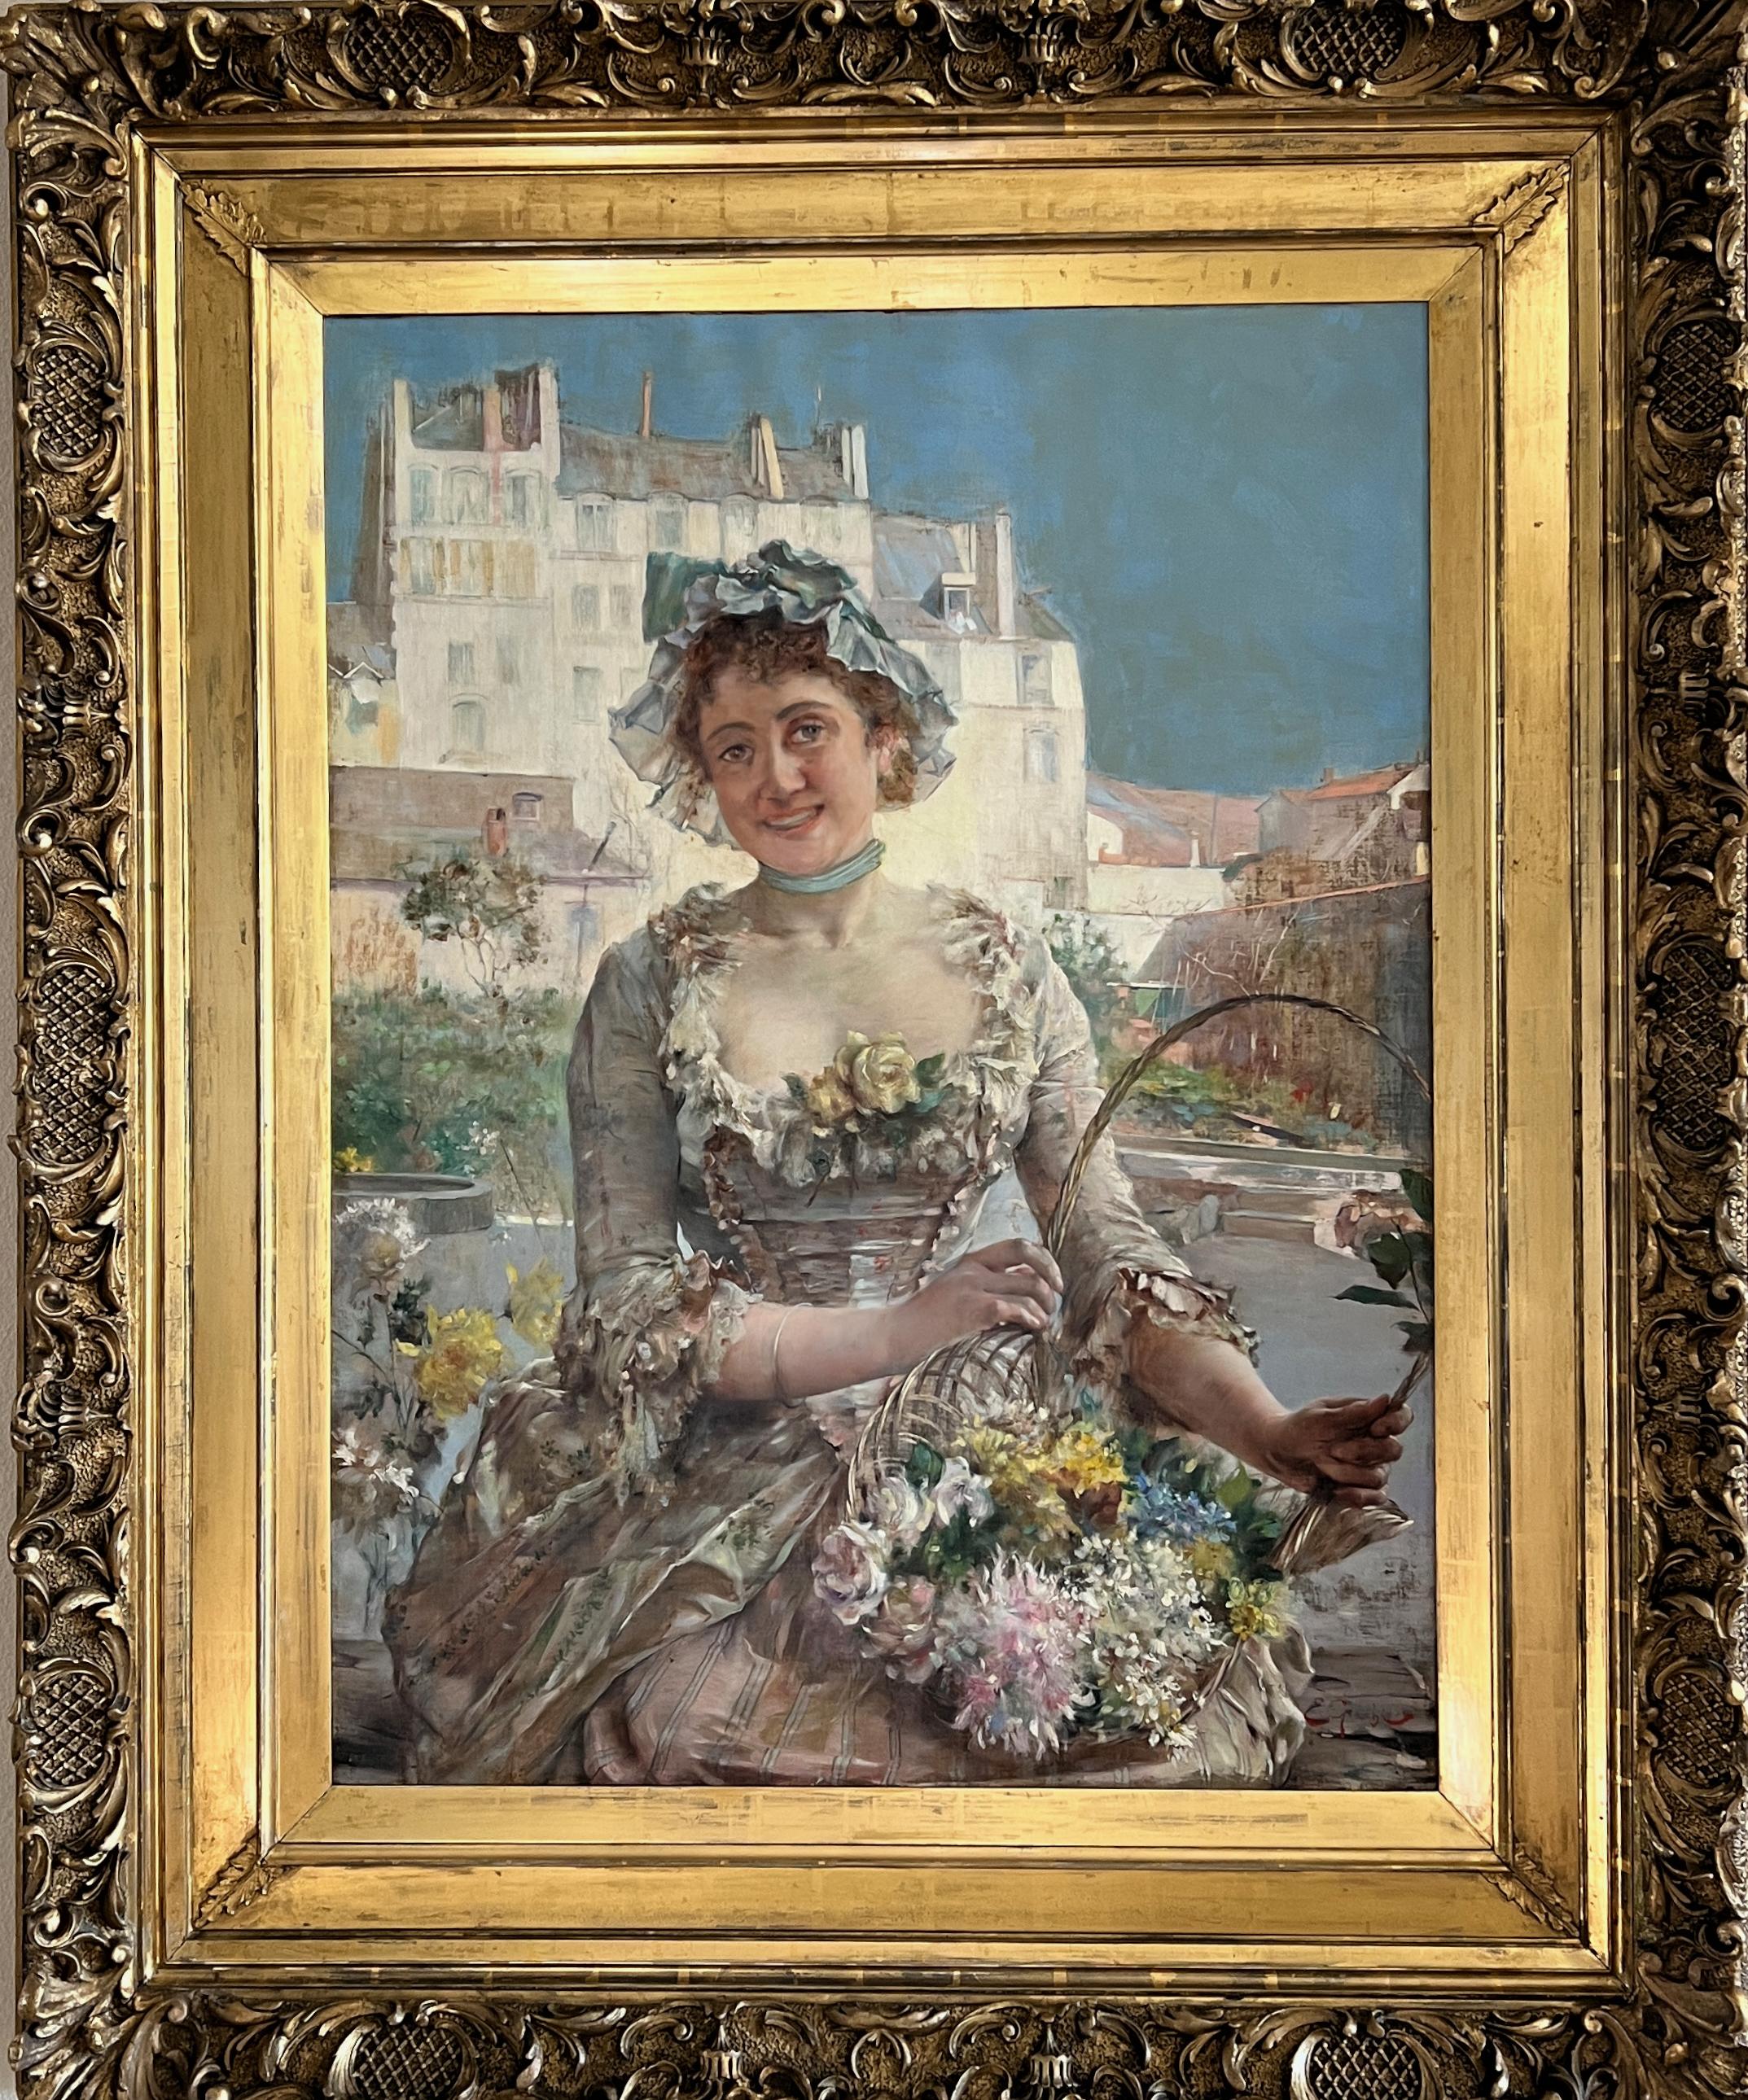 FLOWER GIRL by E. Giachi dress & flowers in Italian town landscape LARGE 19th c For Sale 10